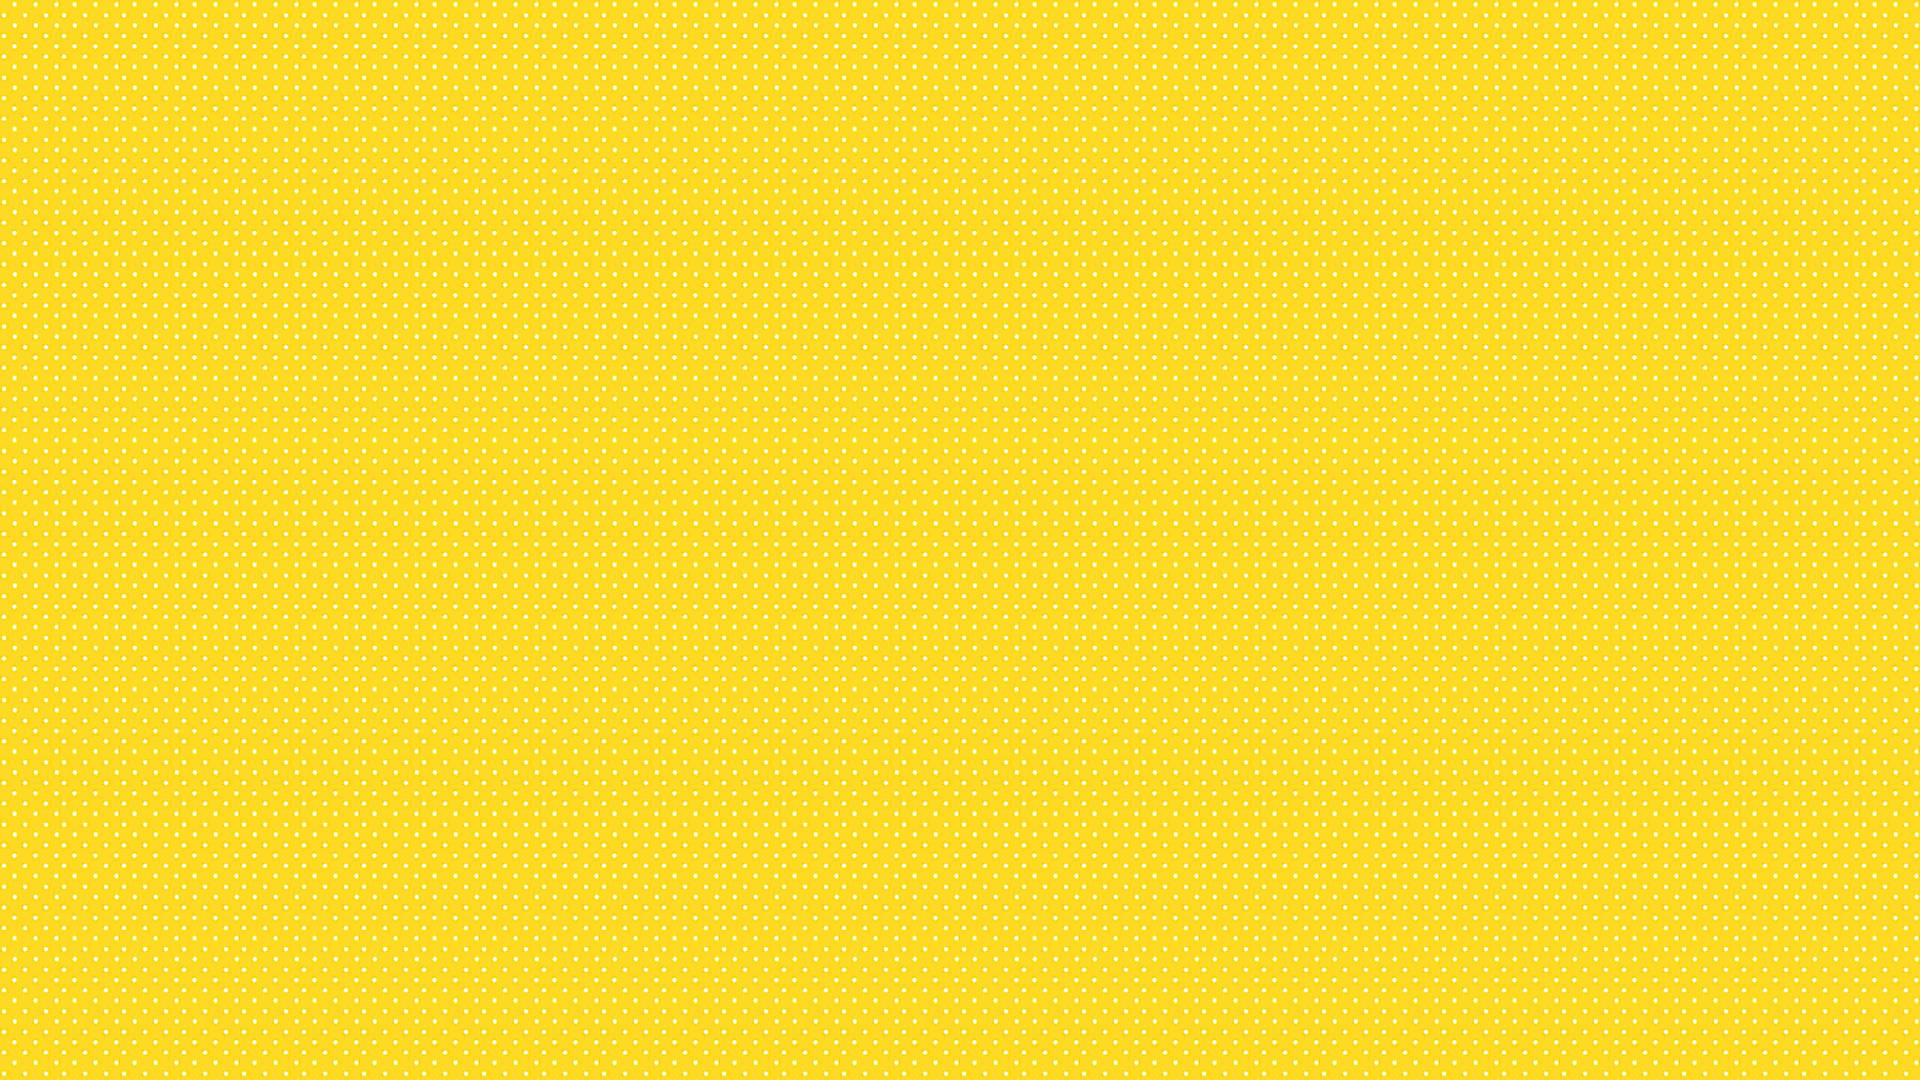 Yellow Aesthetic Dotted Wallpaper